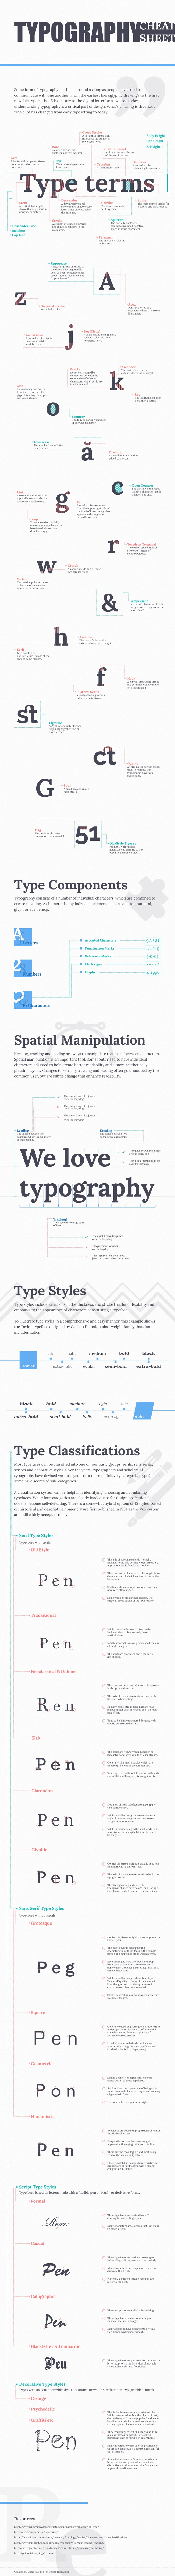 [Infographic] Typography Cheat Sheet